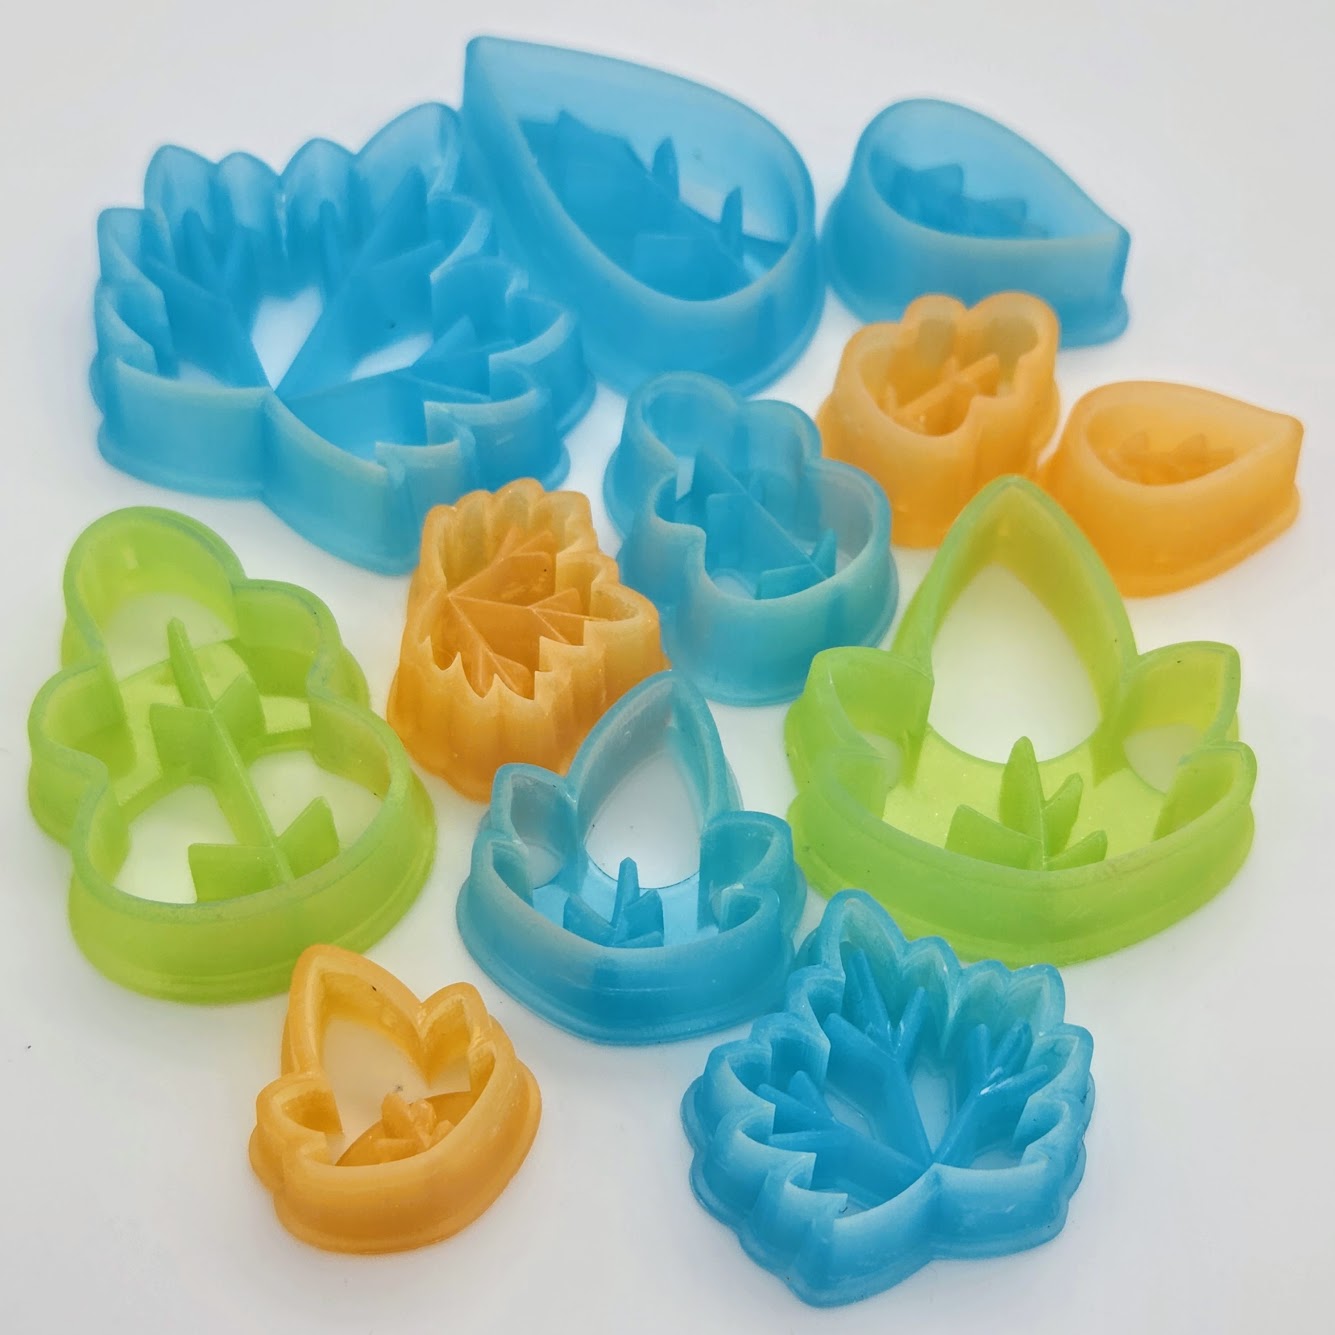 3D Printed Resin Autumn Fall Maple Leaves Polymer Clay Shape Sharp Edge Cutters